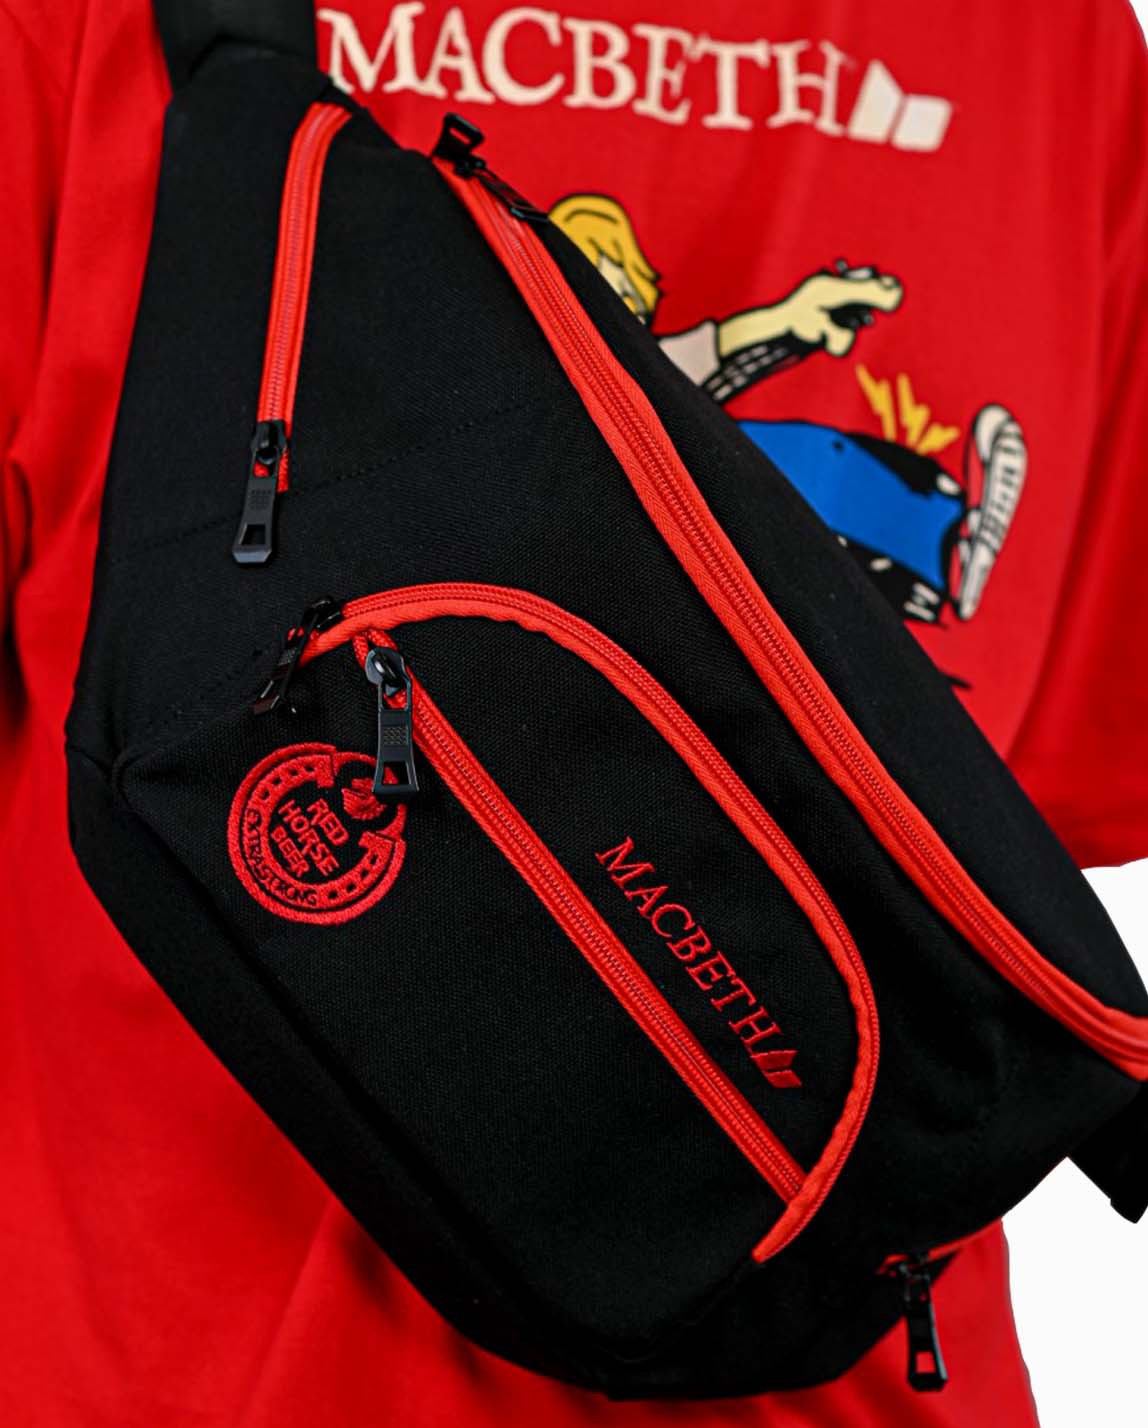 Picture of Red Horse belt bag